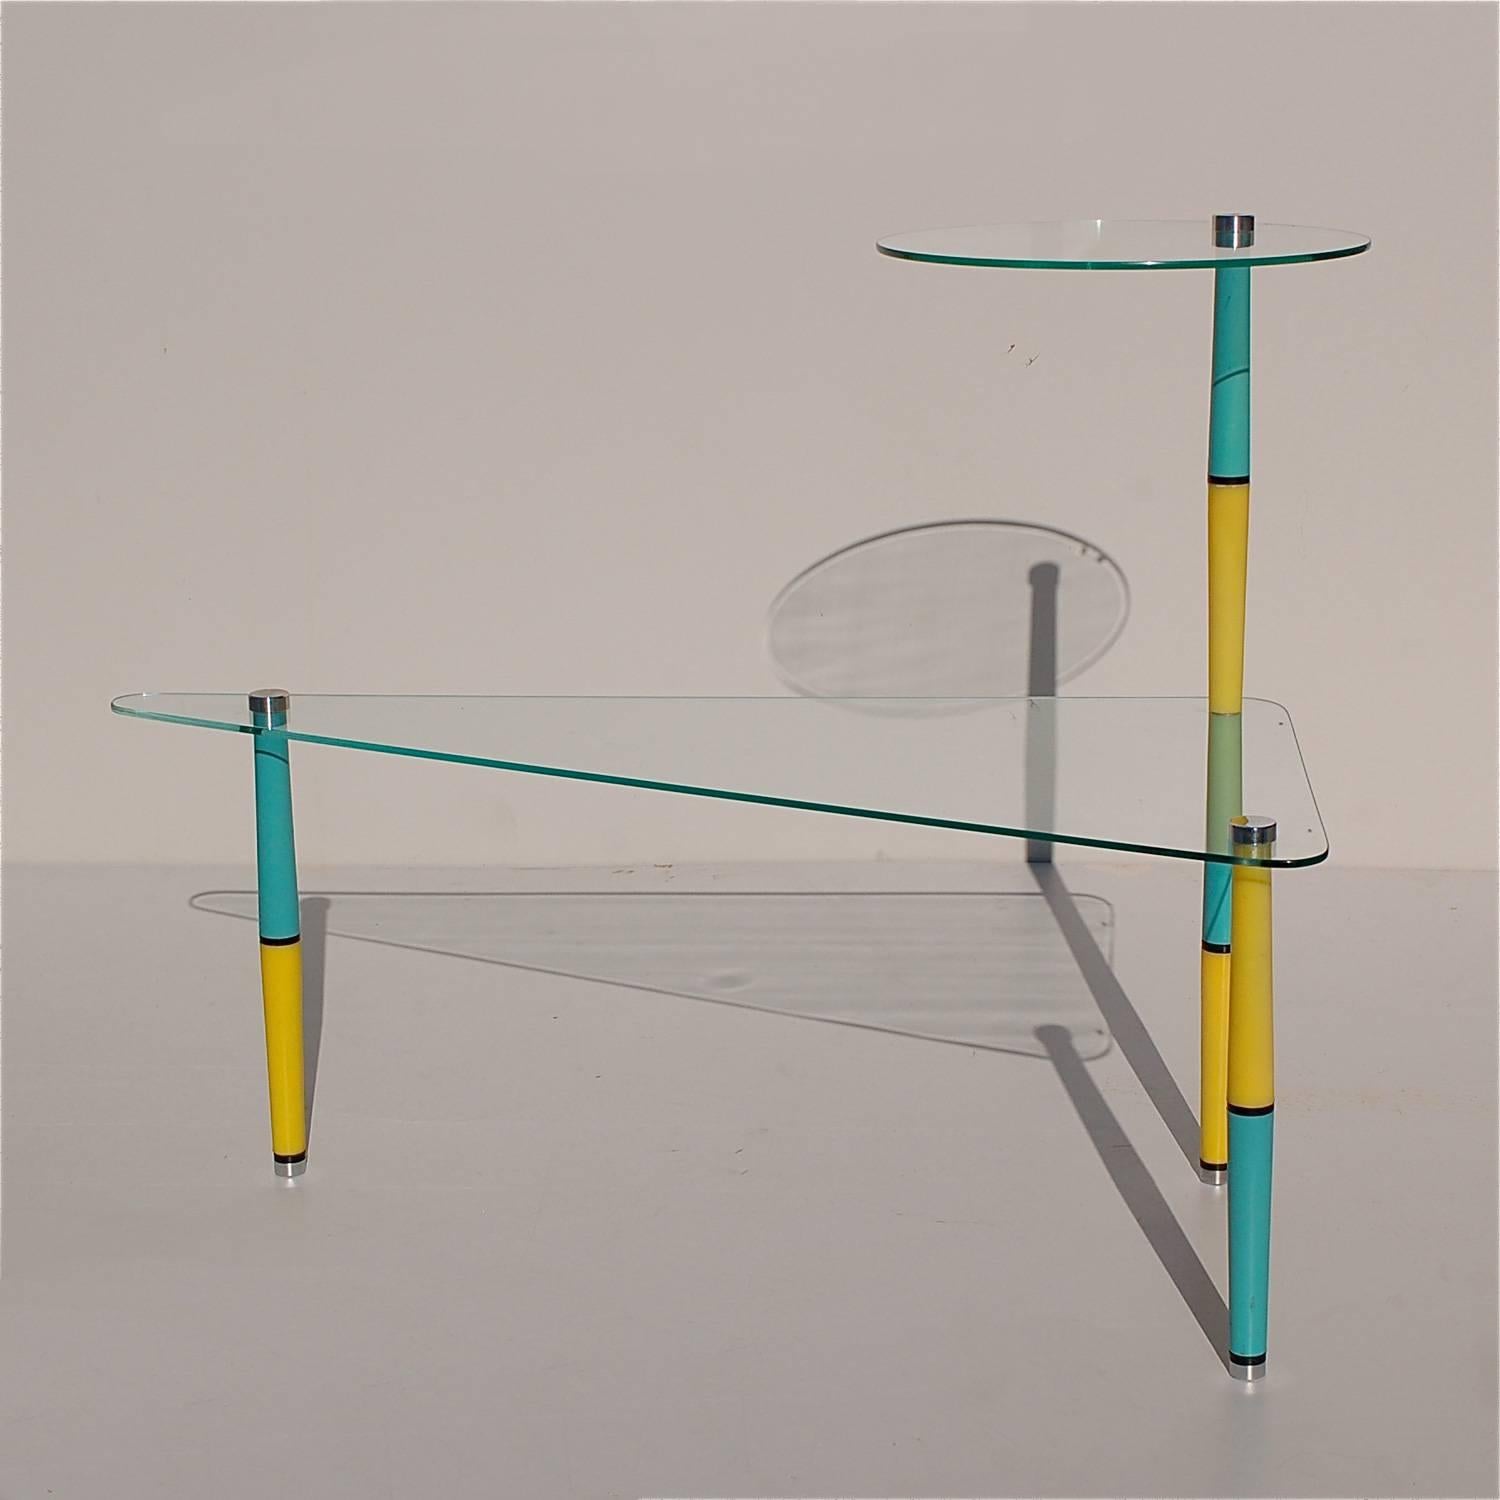 This vintage shop window display table has a dual purpose as a two tiered, colorful side table. Please check the Profound Objects shopfront for other available models and colors. Different configurations are possible by assembling individual glass